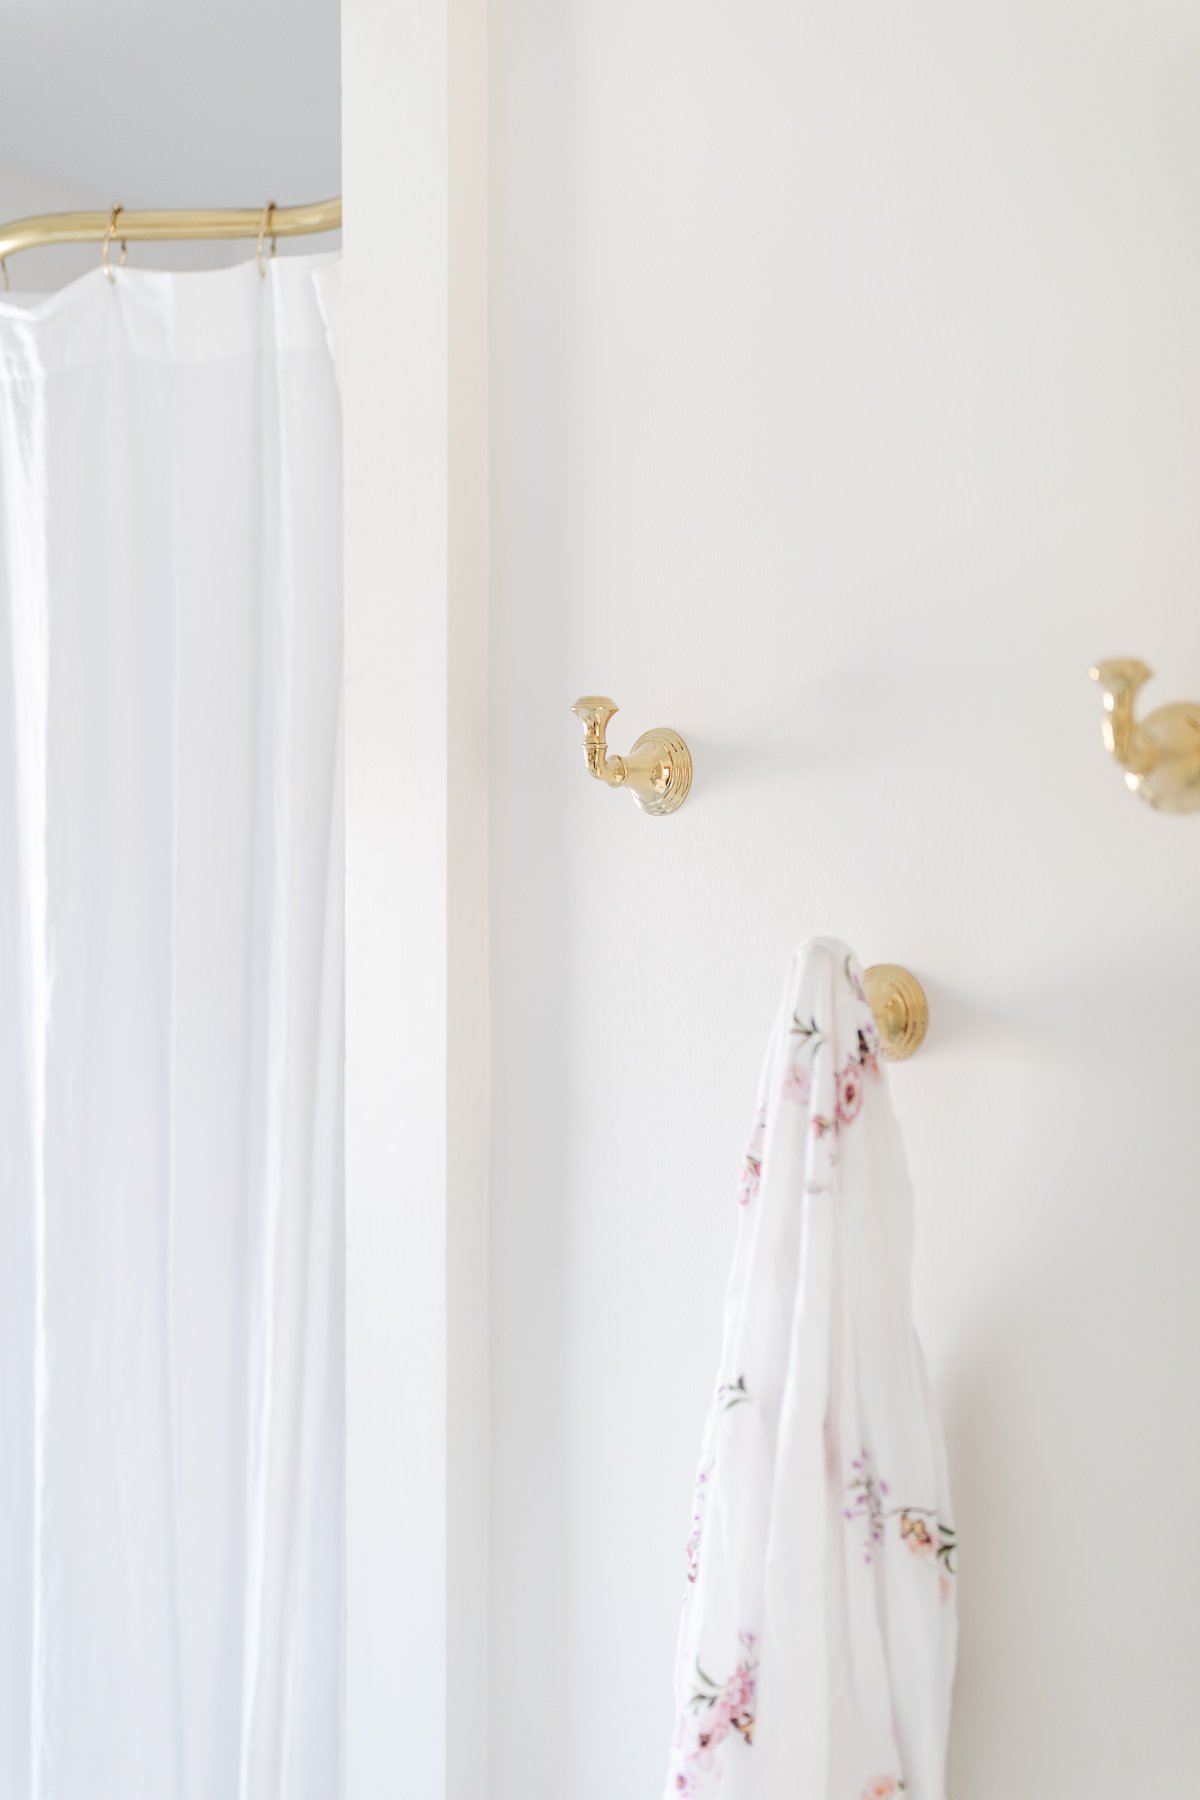 A white bathroom with brass hooks, a pink floral robe hanging from one.